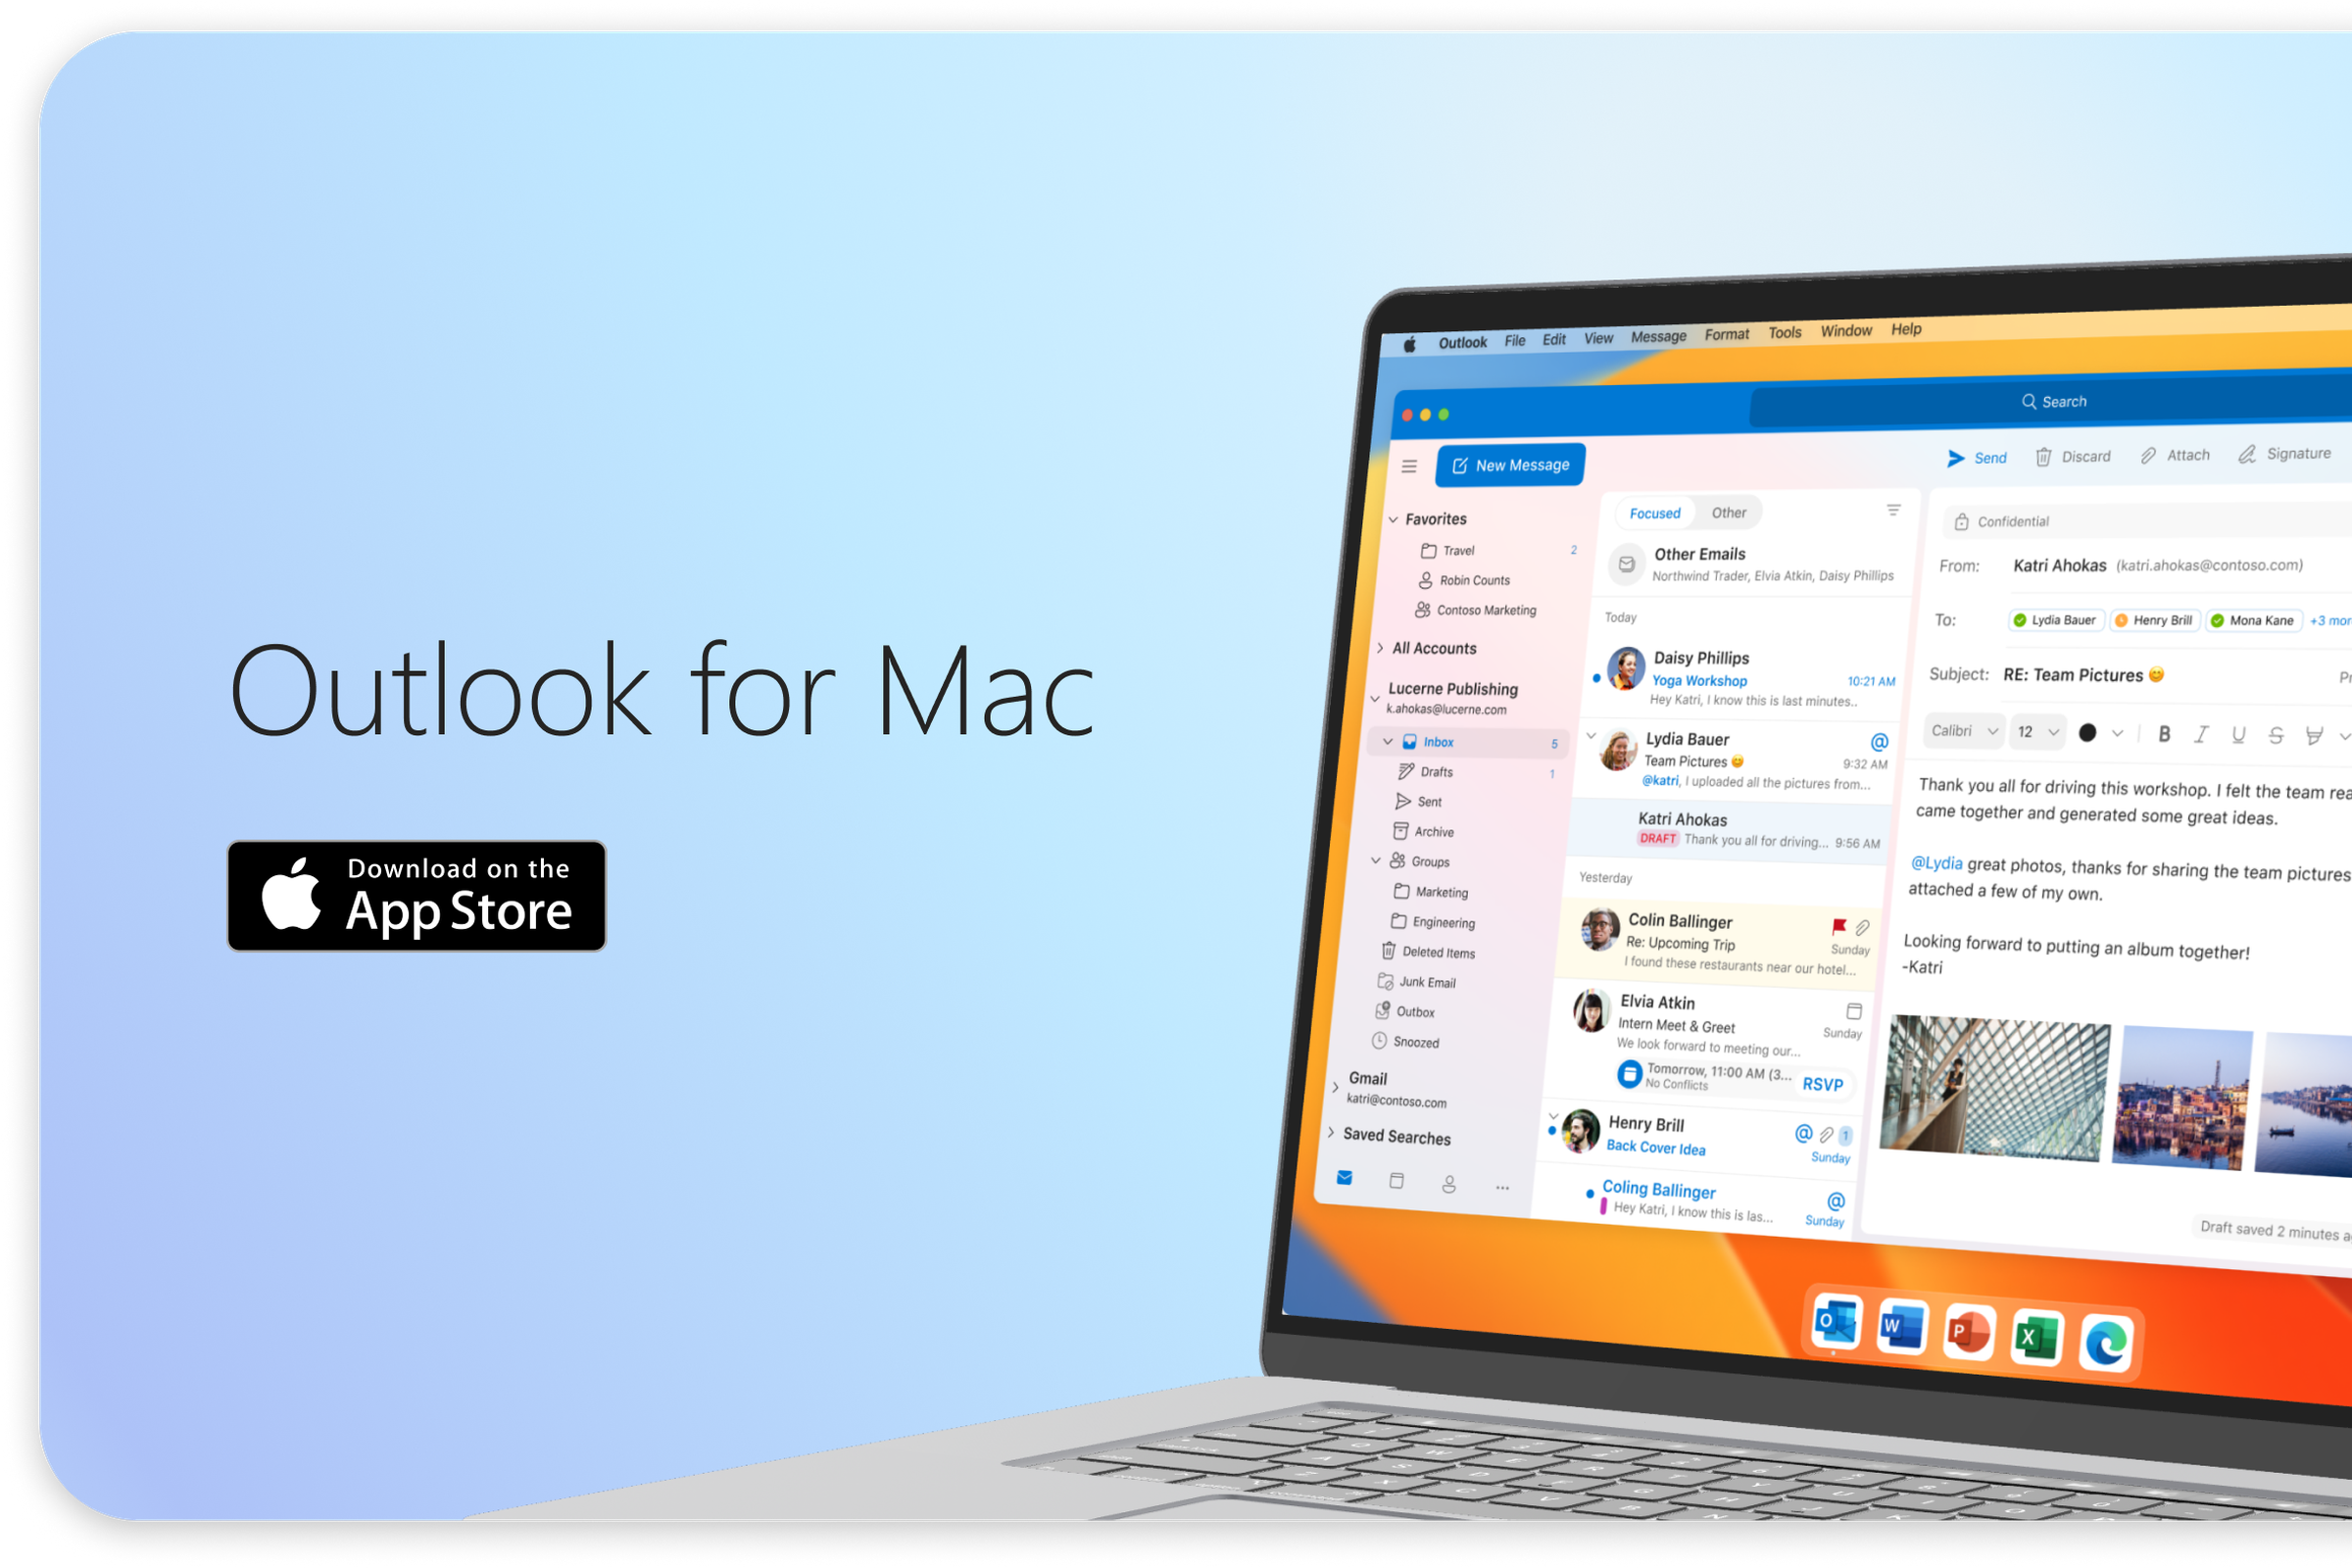 Illustration of Outlook for Mac email client in Apple’s App Store